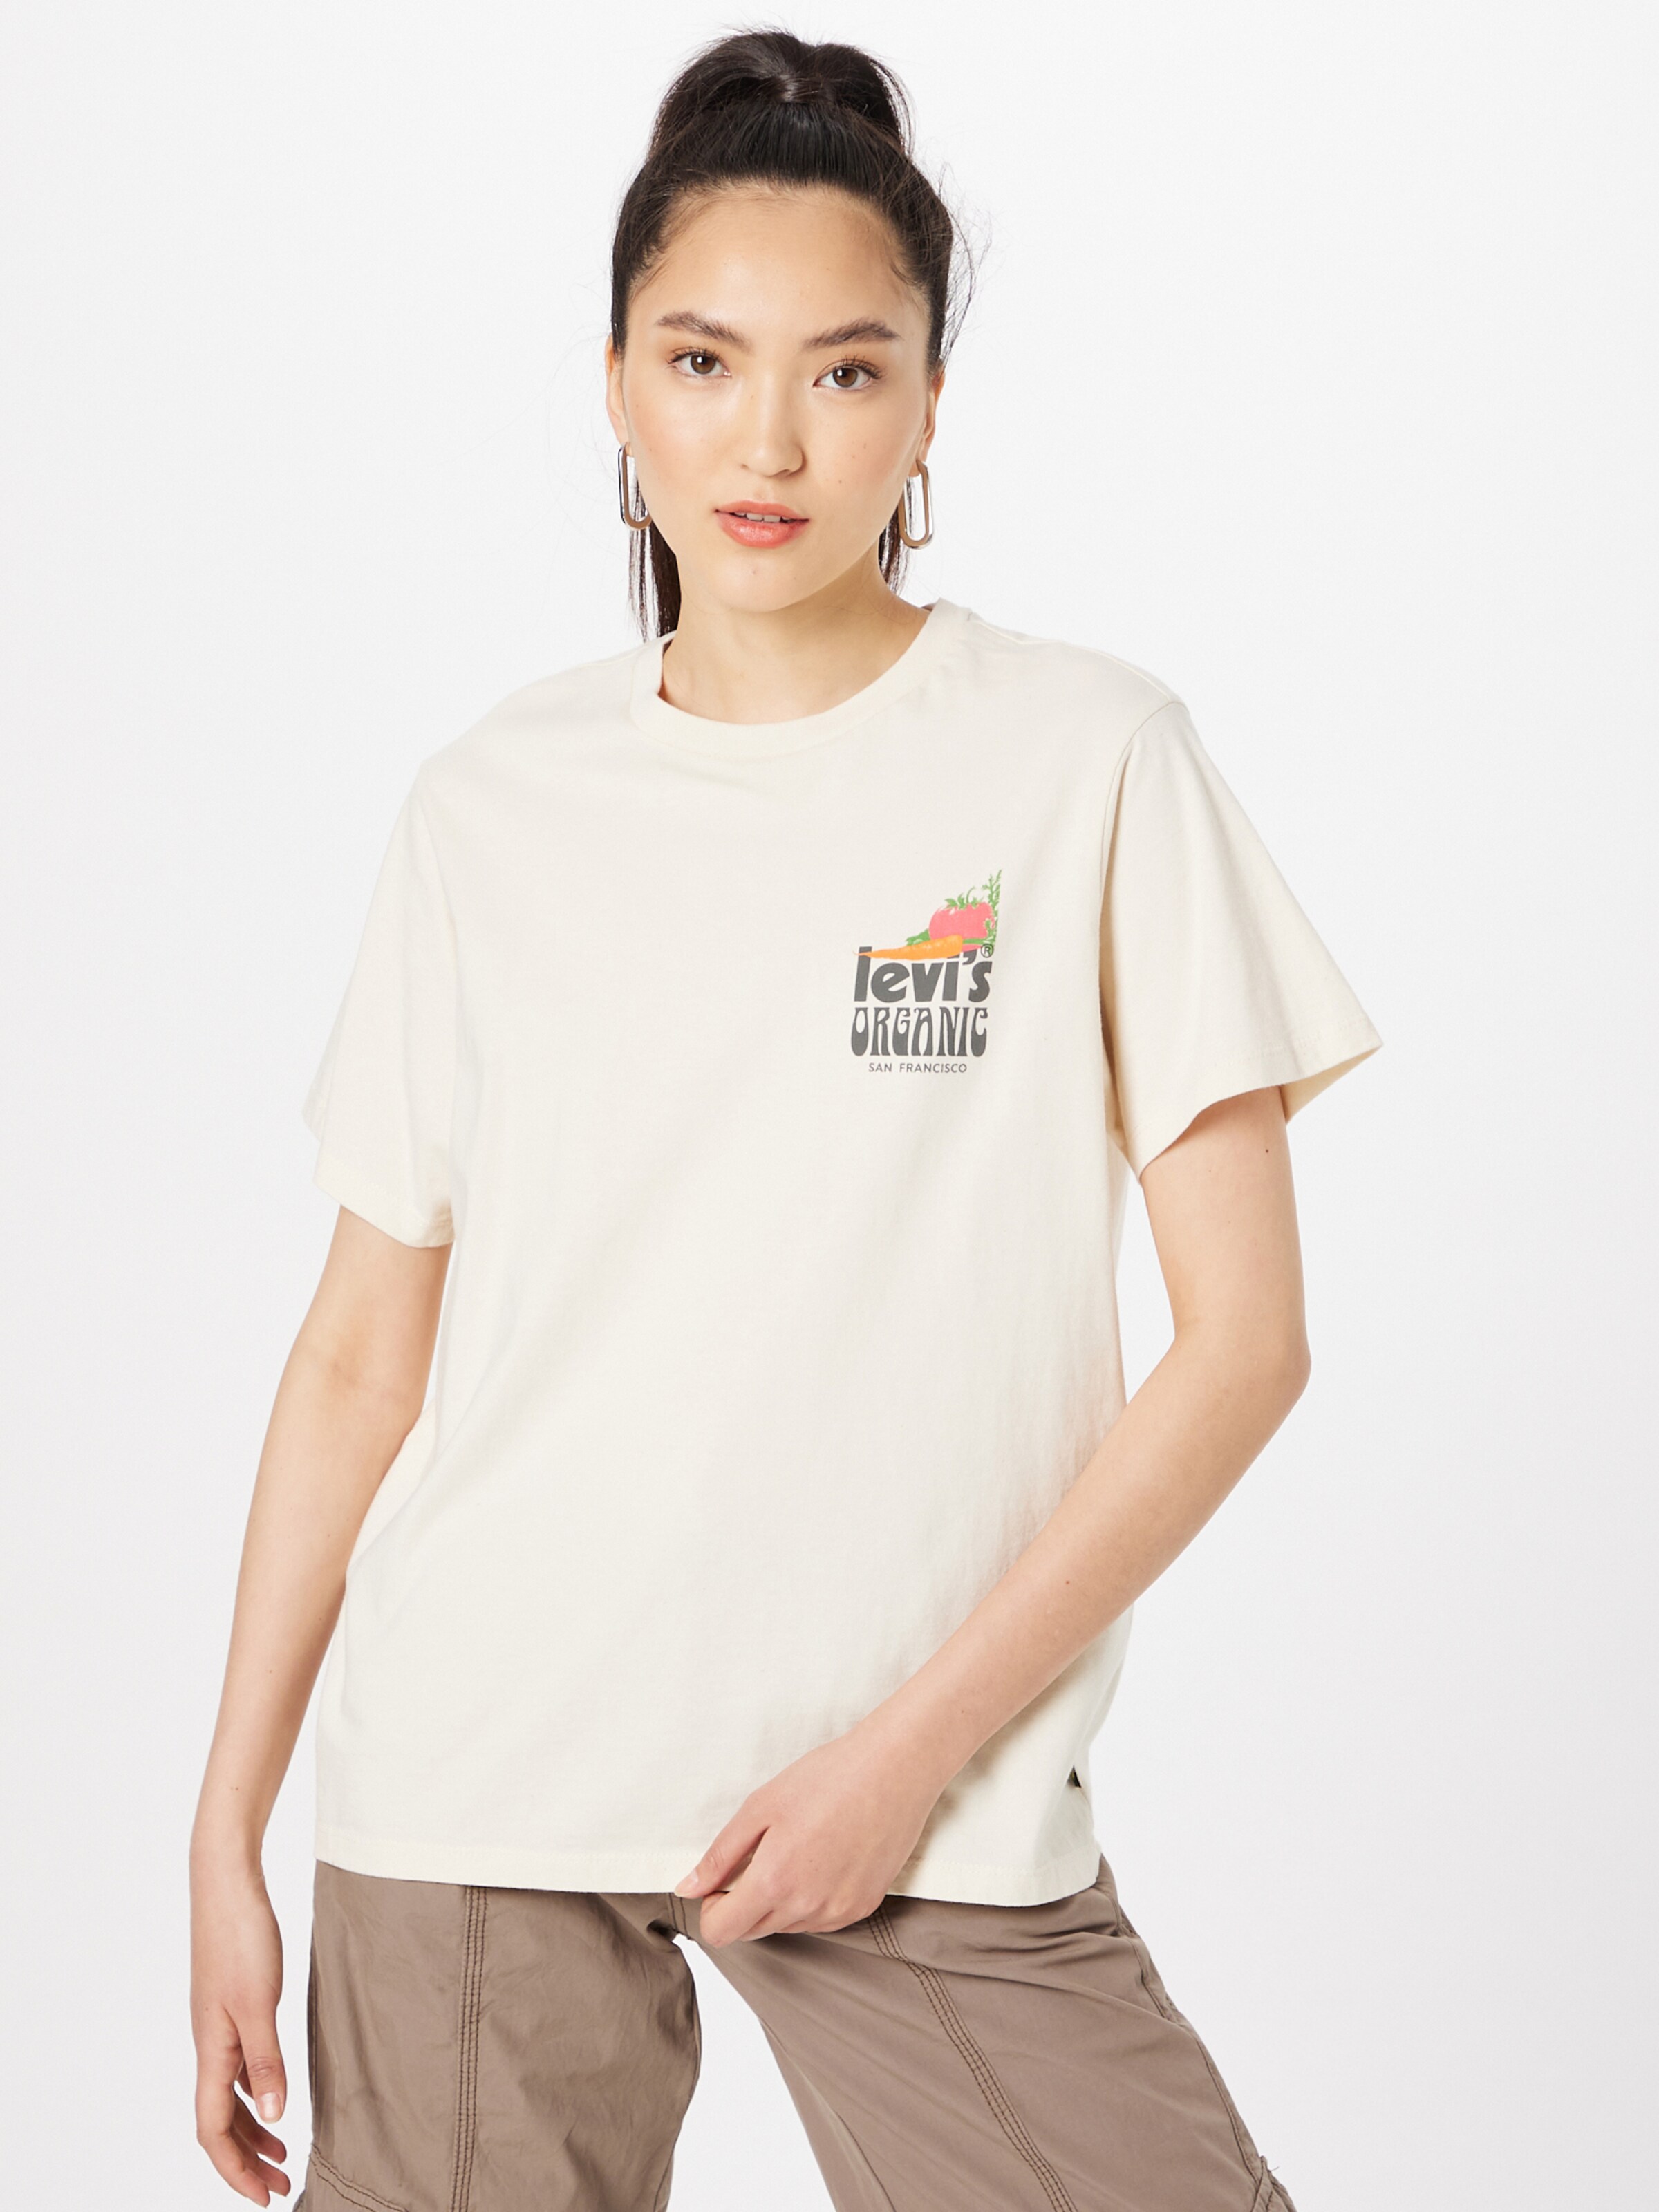 Frauen Shirts & Tops LEVI'S T-Shirt in Beige - LY11808